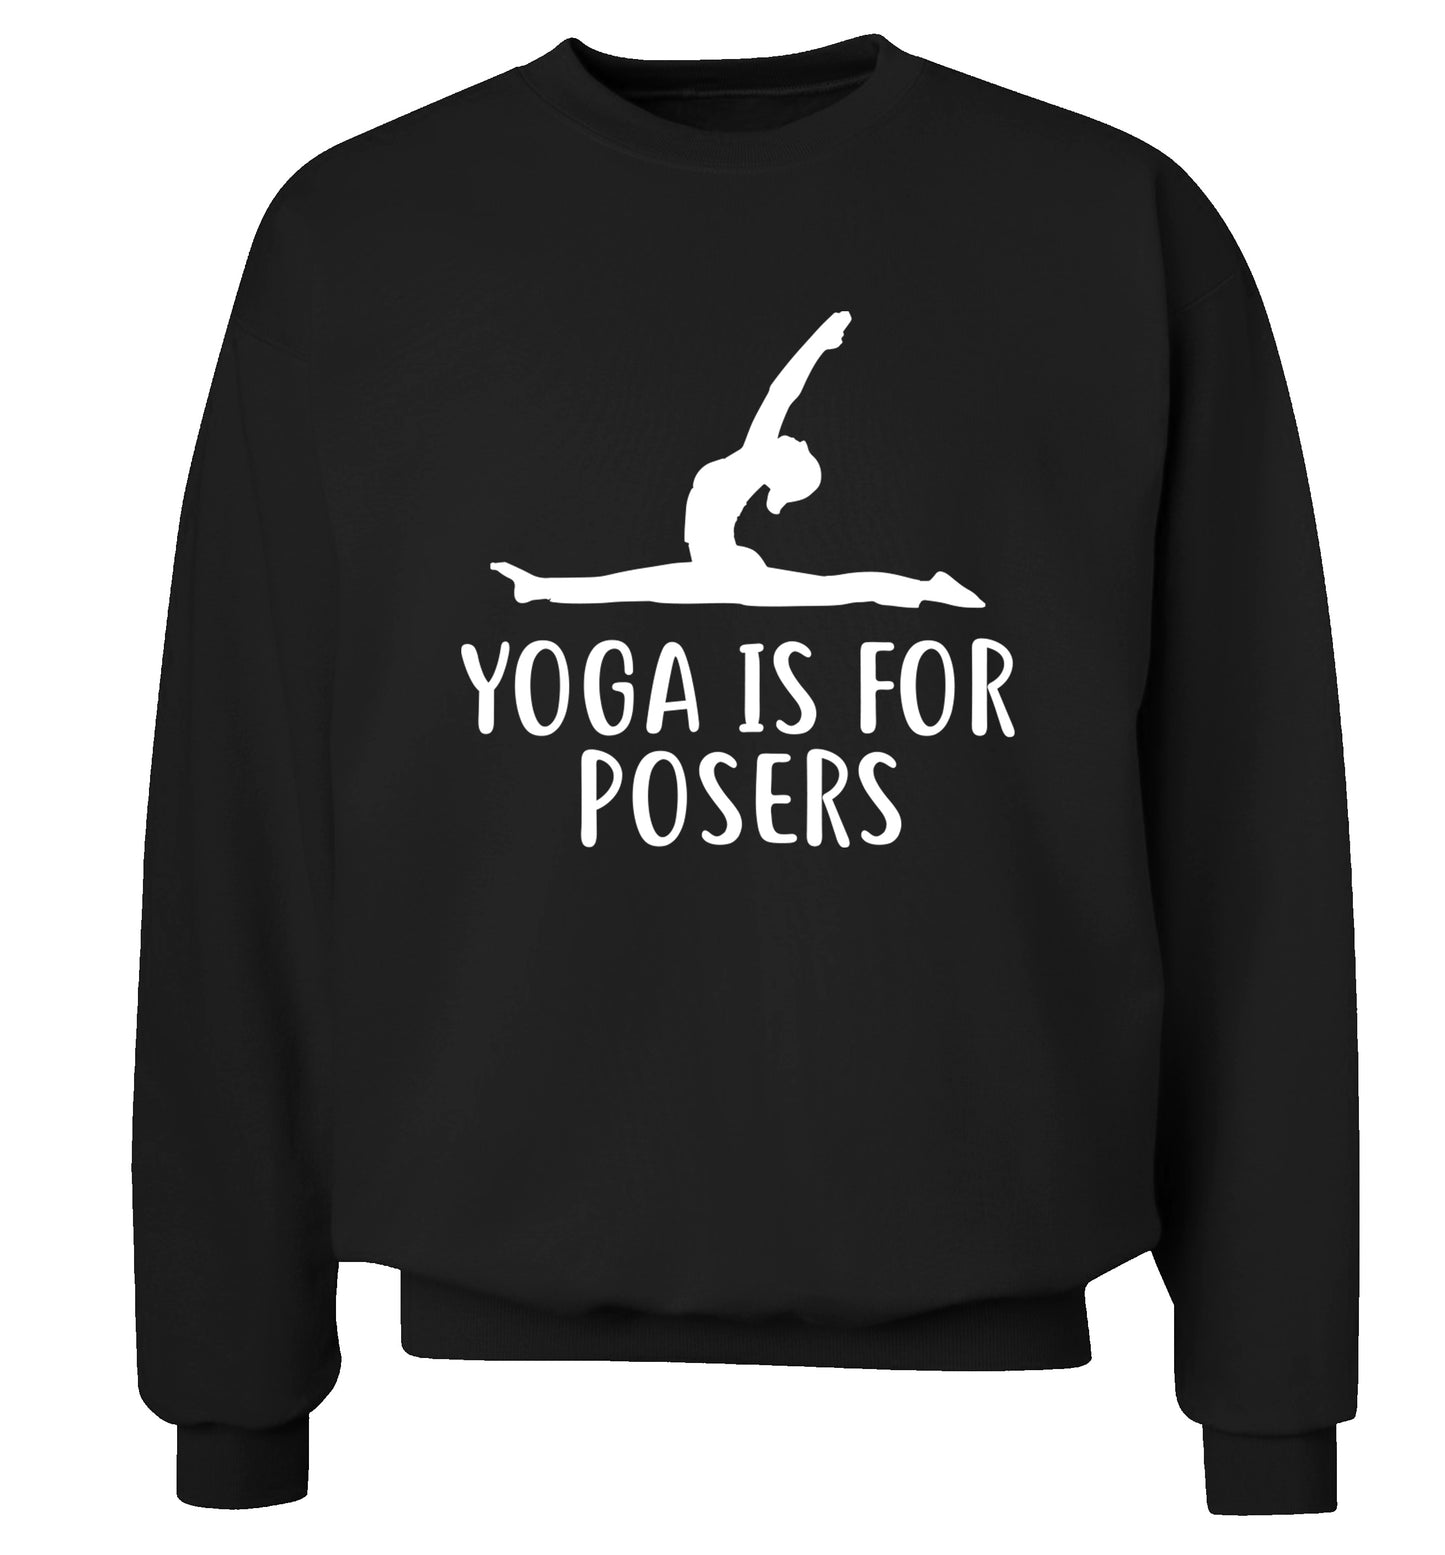 Yoga is for posers Adult's unisex black Sweater 2XL